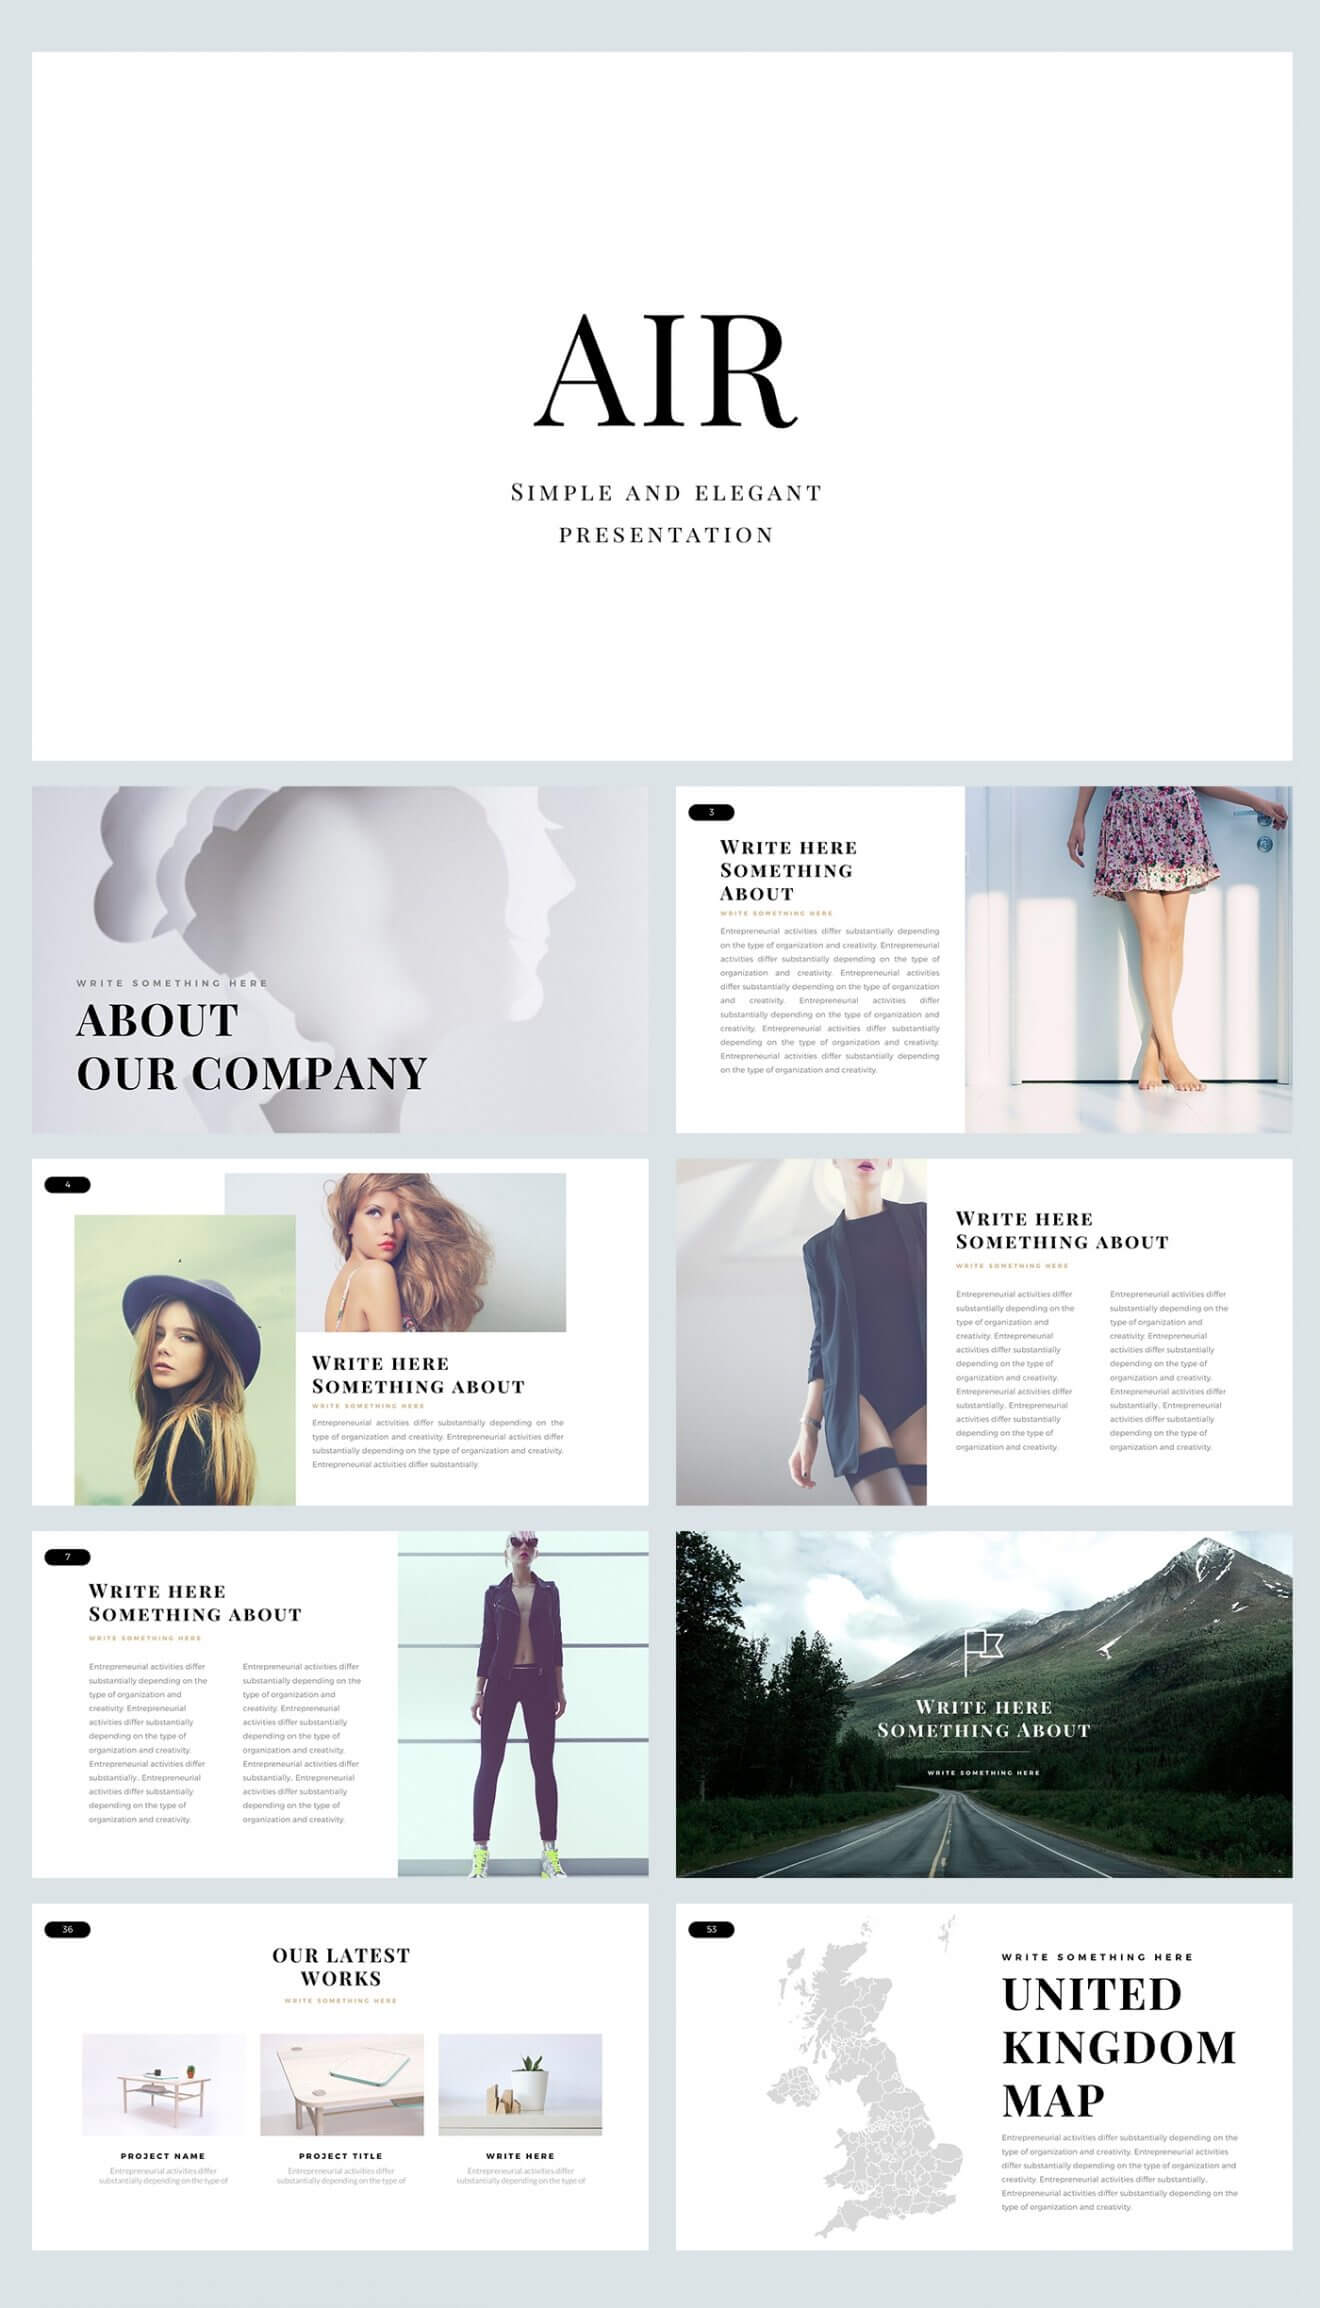 Air Free Powerpoint Template(9 Slides) – Just Free Slides Regarding Powerpoint Photo Slideshow Template